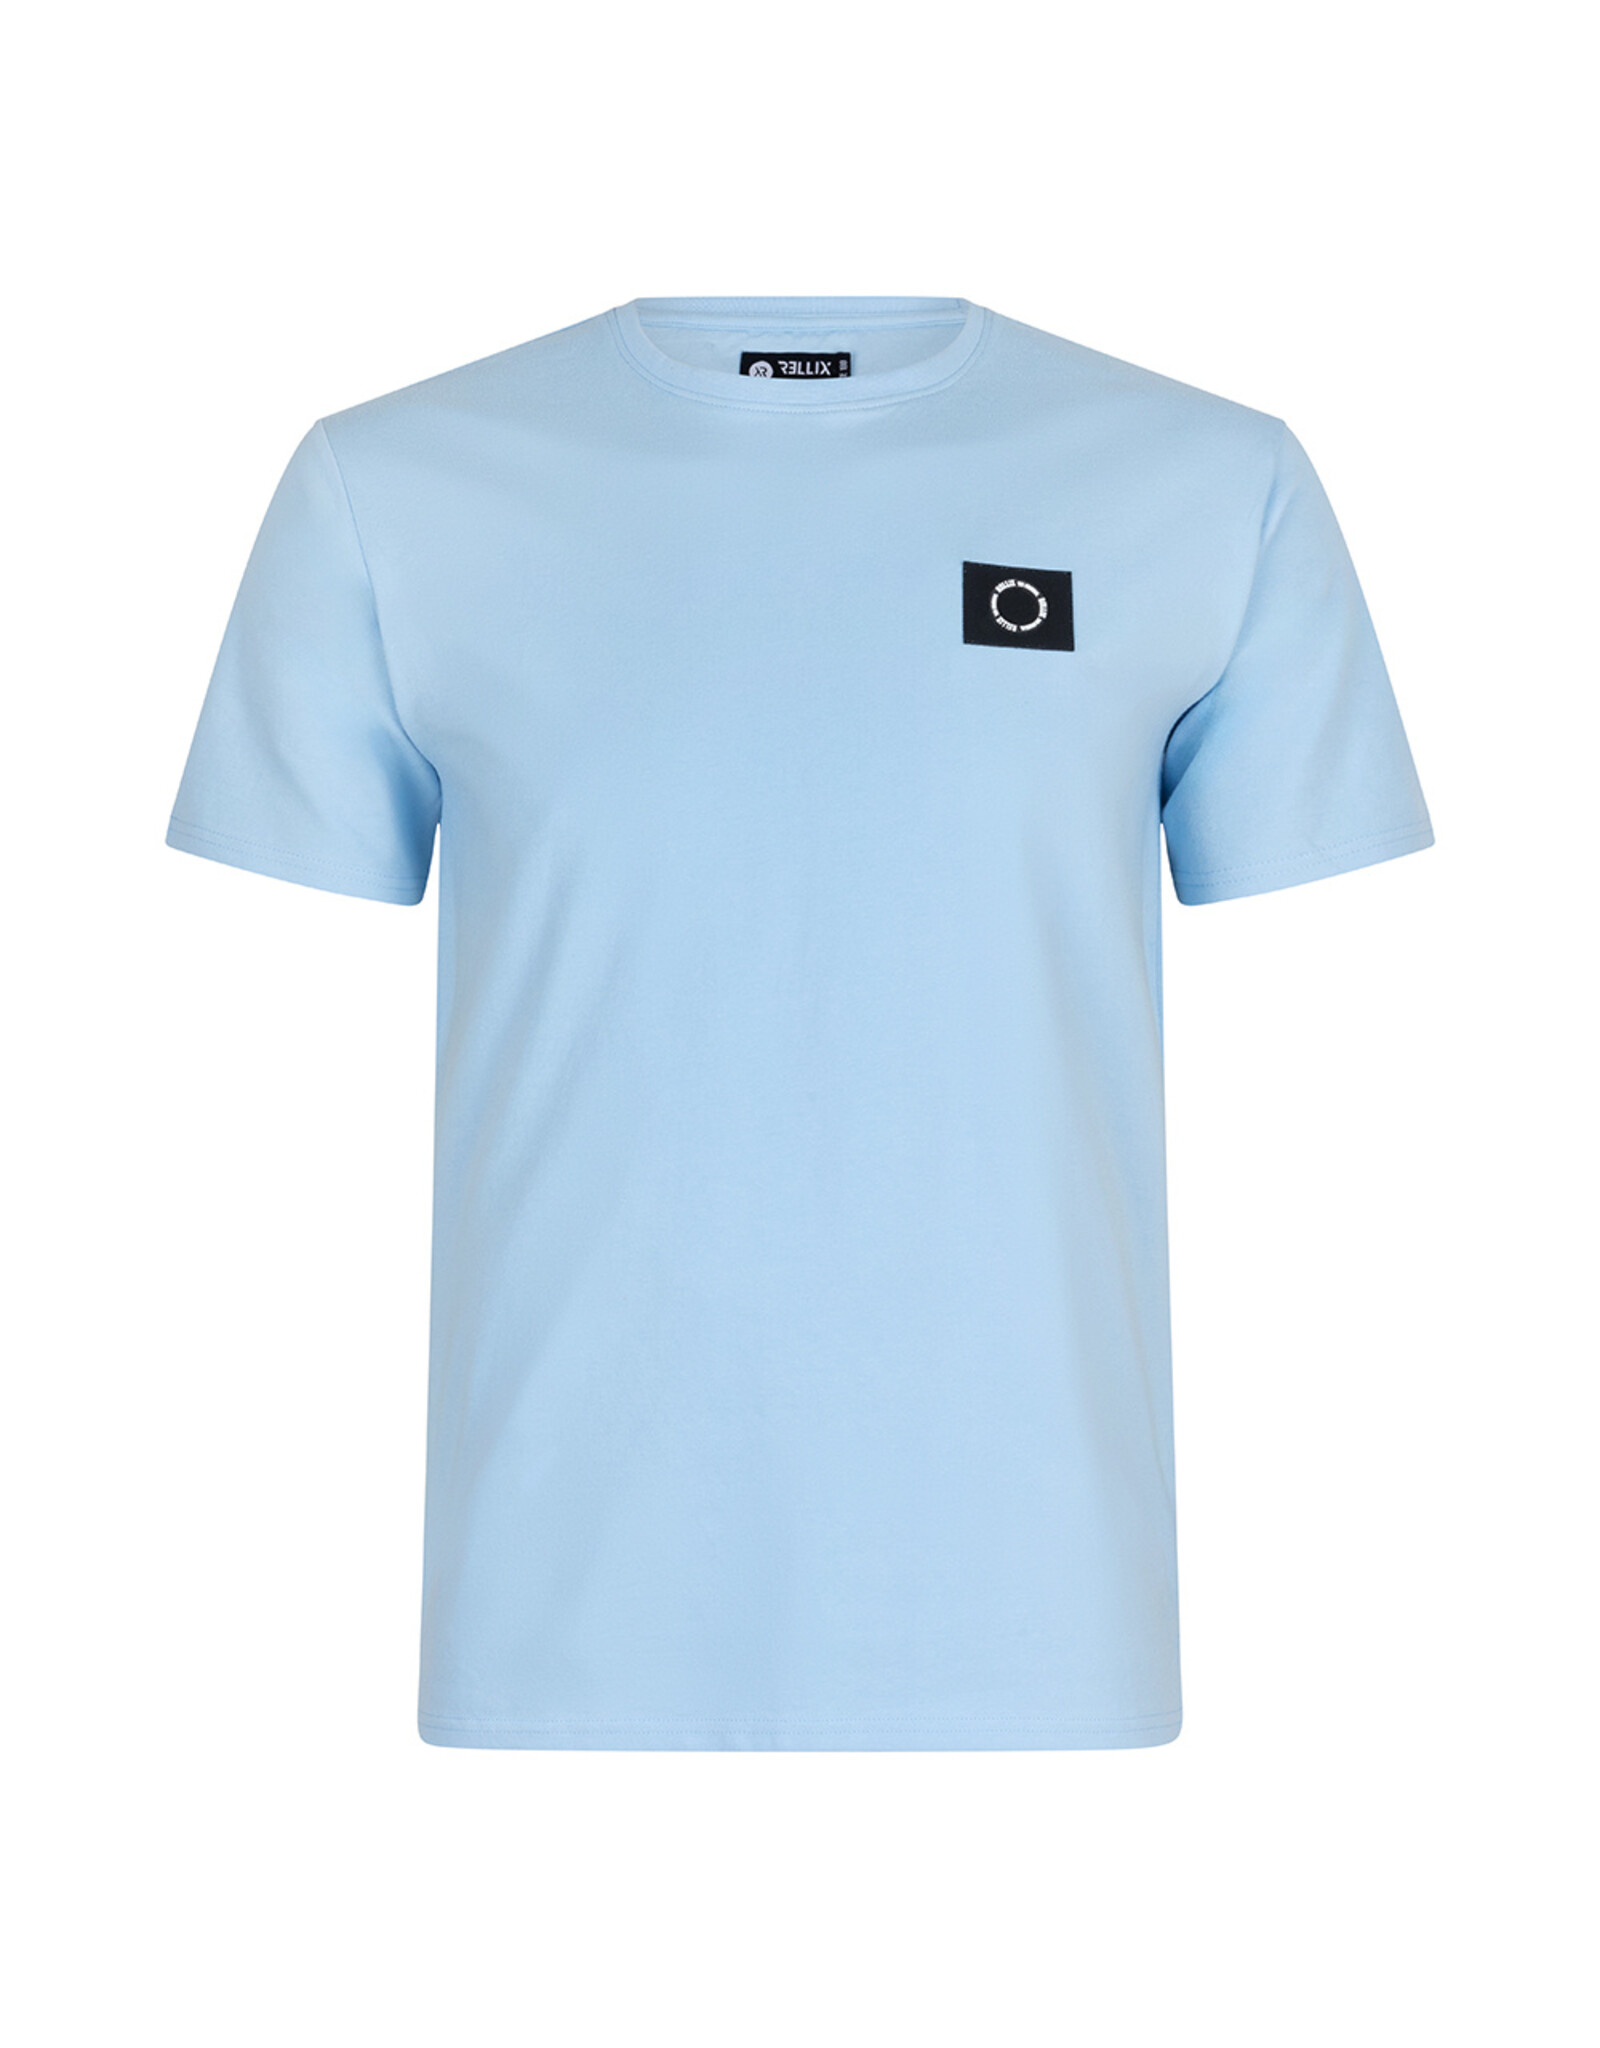 Rellix T-Shirt SS Basic Ice Blue-550